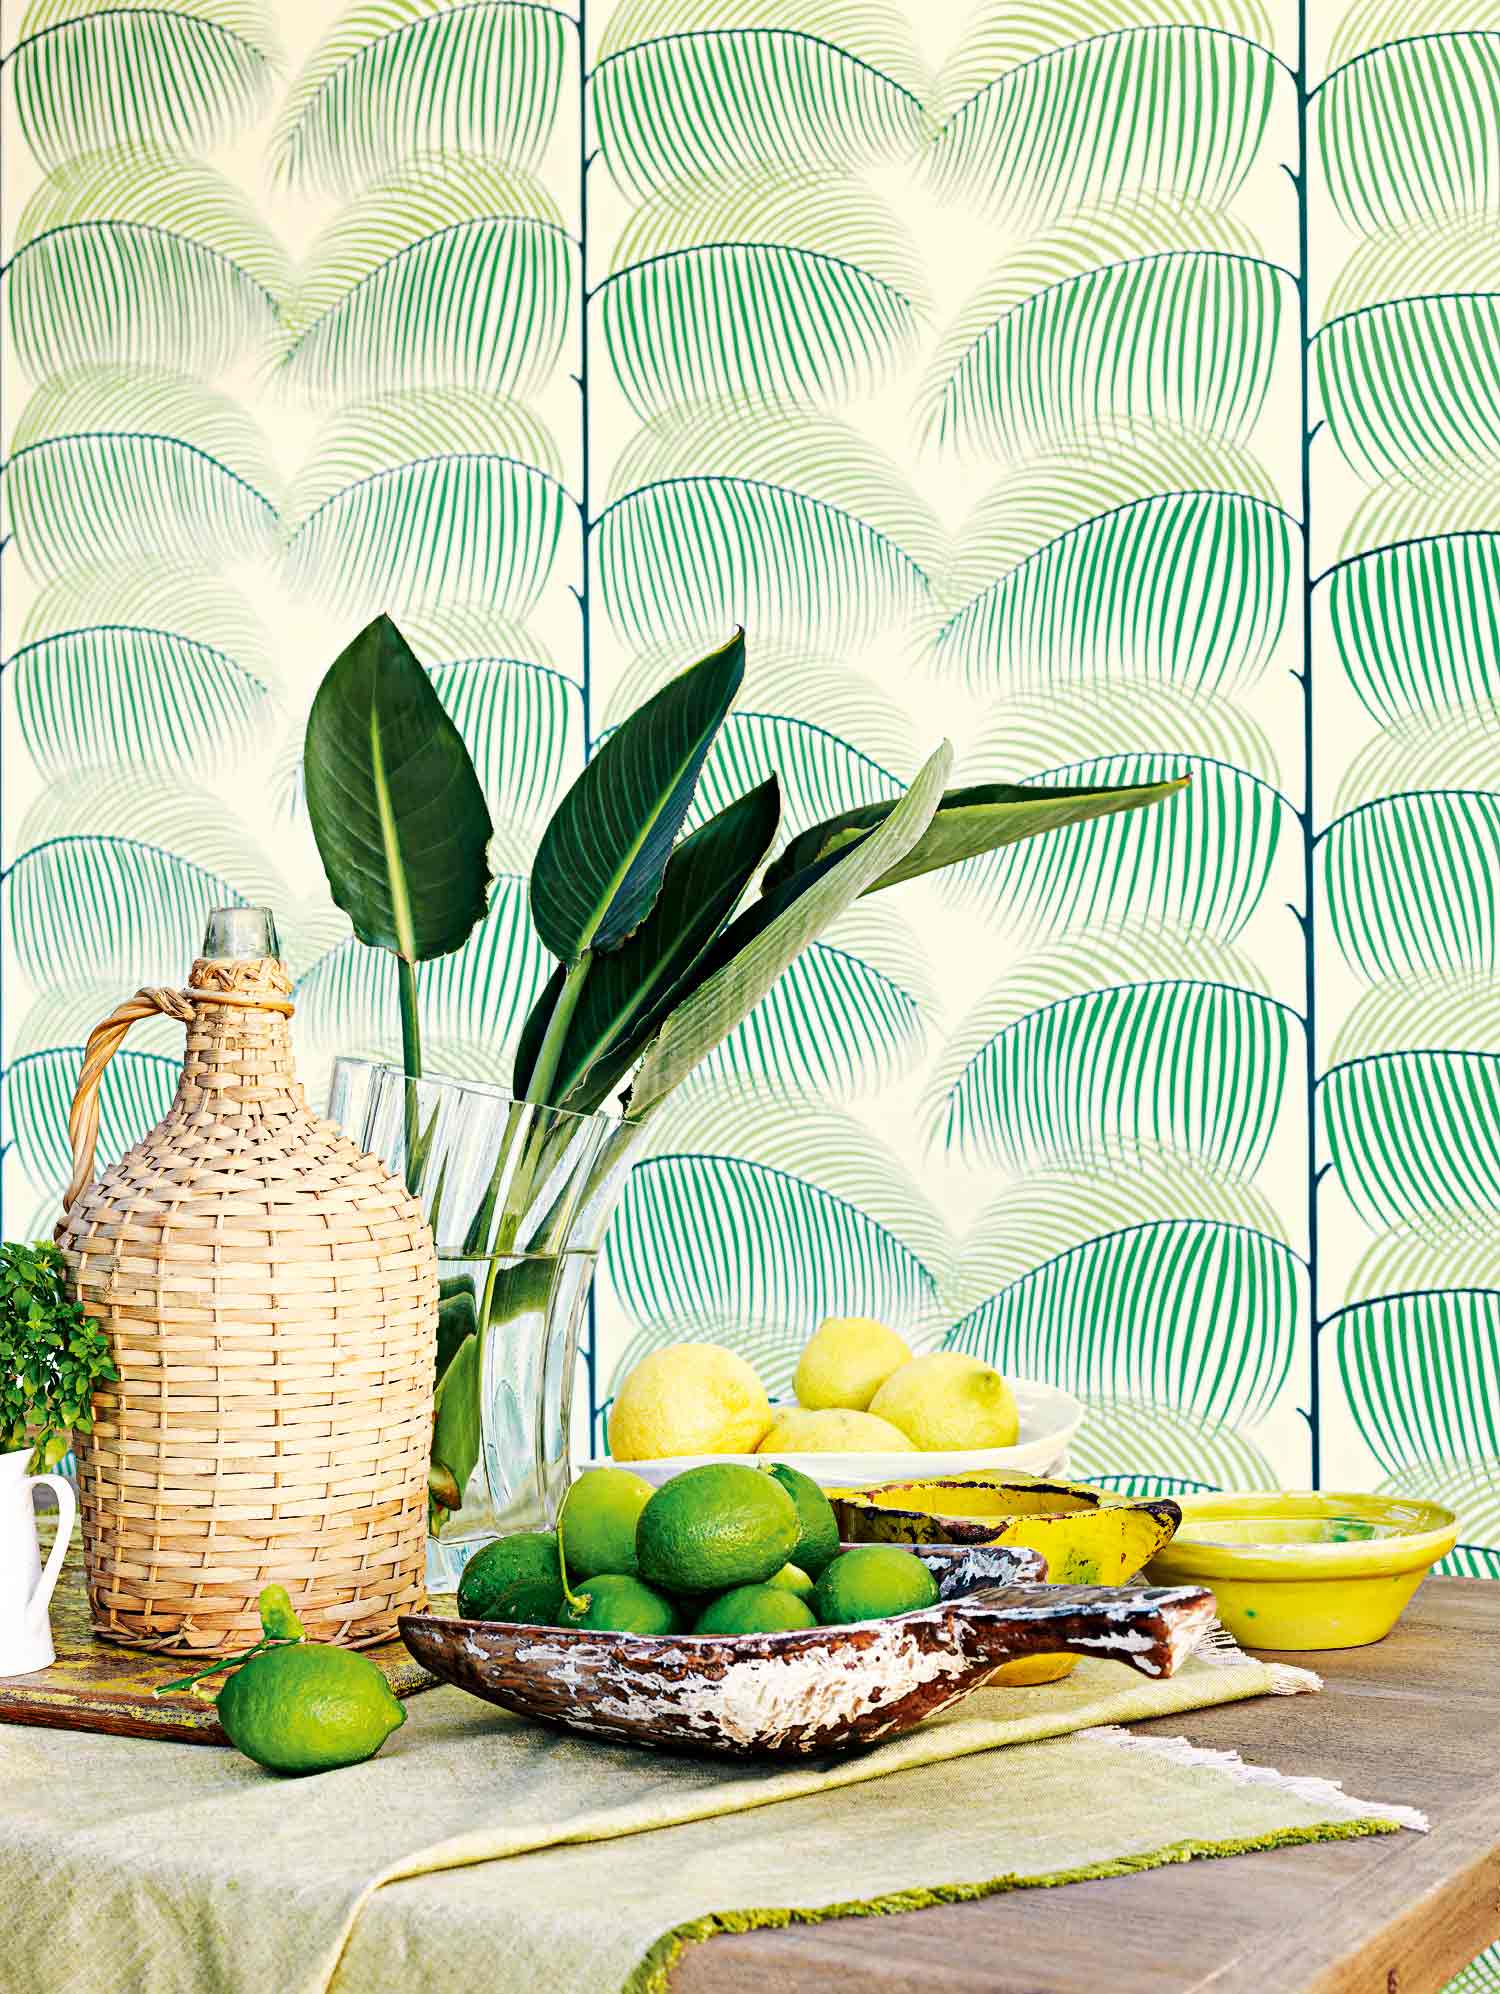 Voyage of Discovery Manila Wallpaper, Sanderson at Janine.com.my